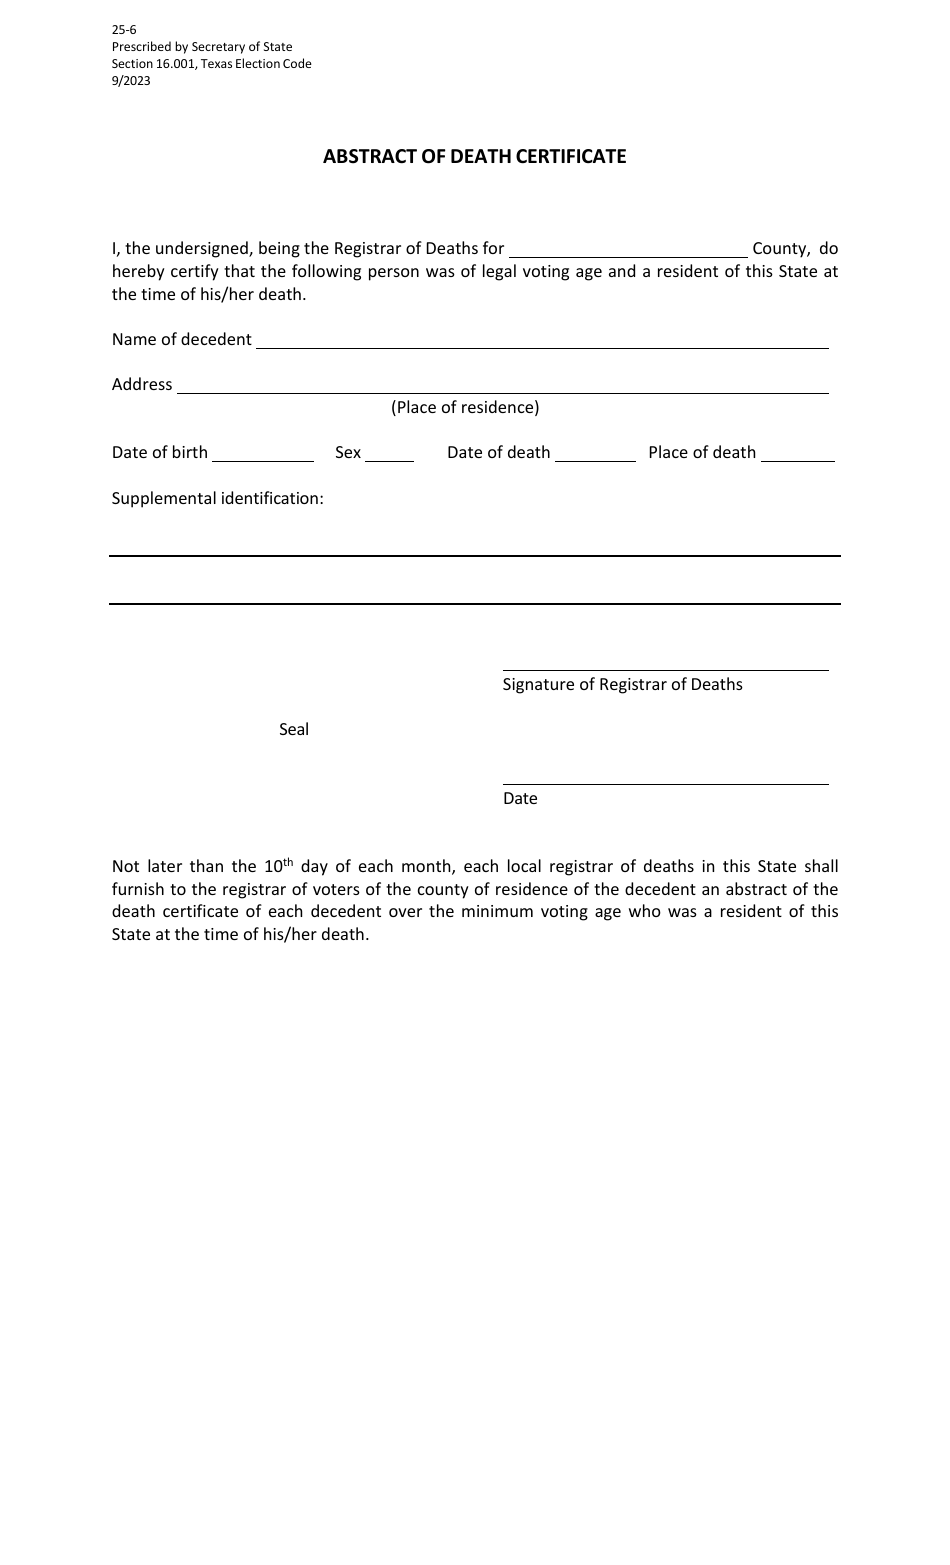 Form 25-6 Abstract of Death Certificate - Texas, Page 1